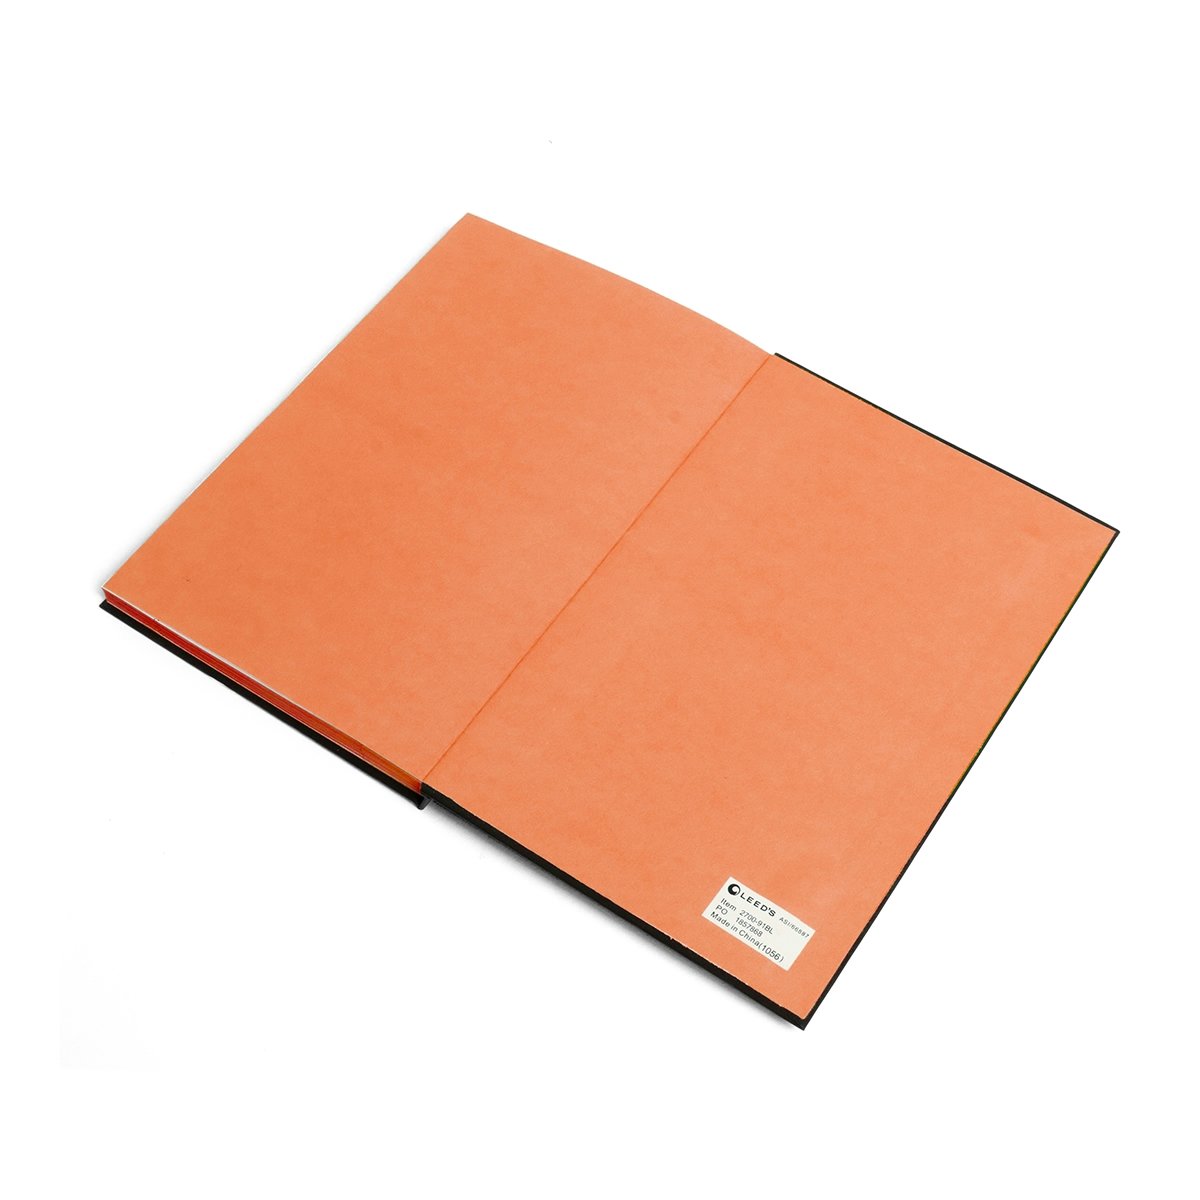 Circle of “M” Color Contrast Notebook – Ruled